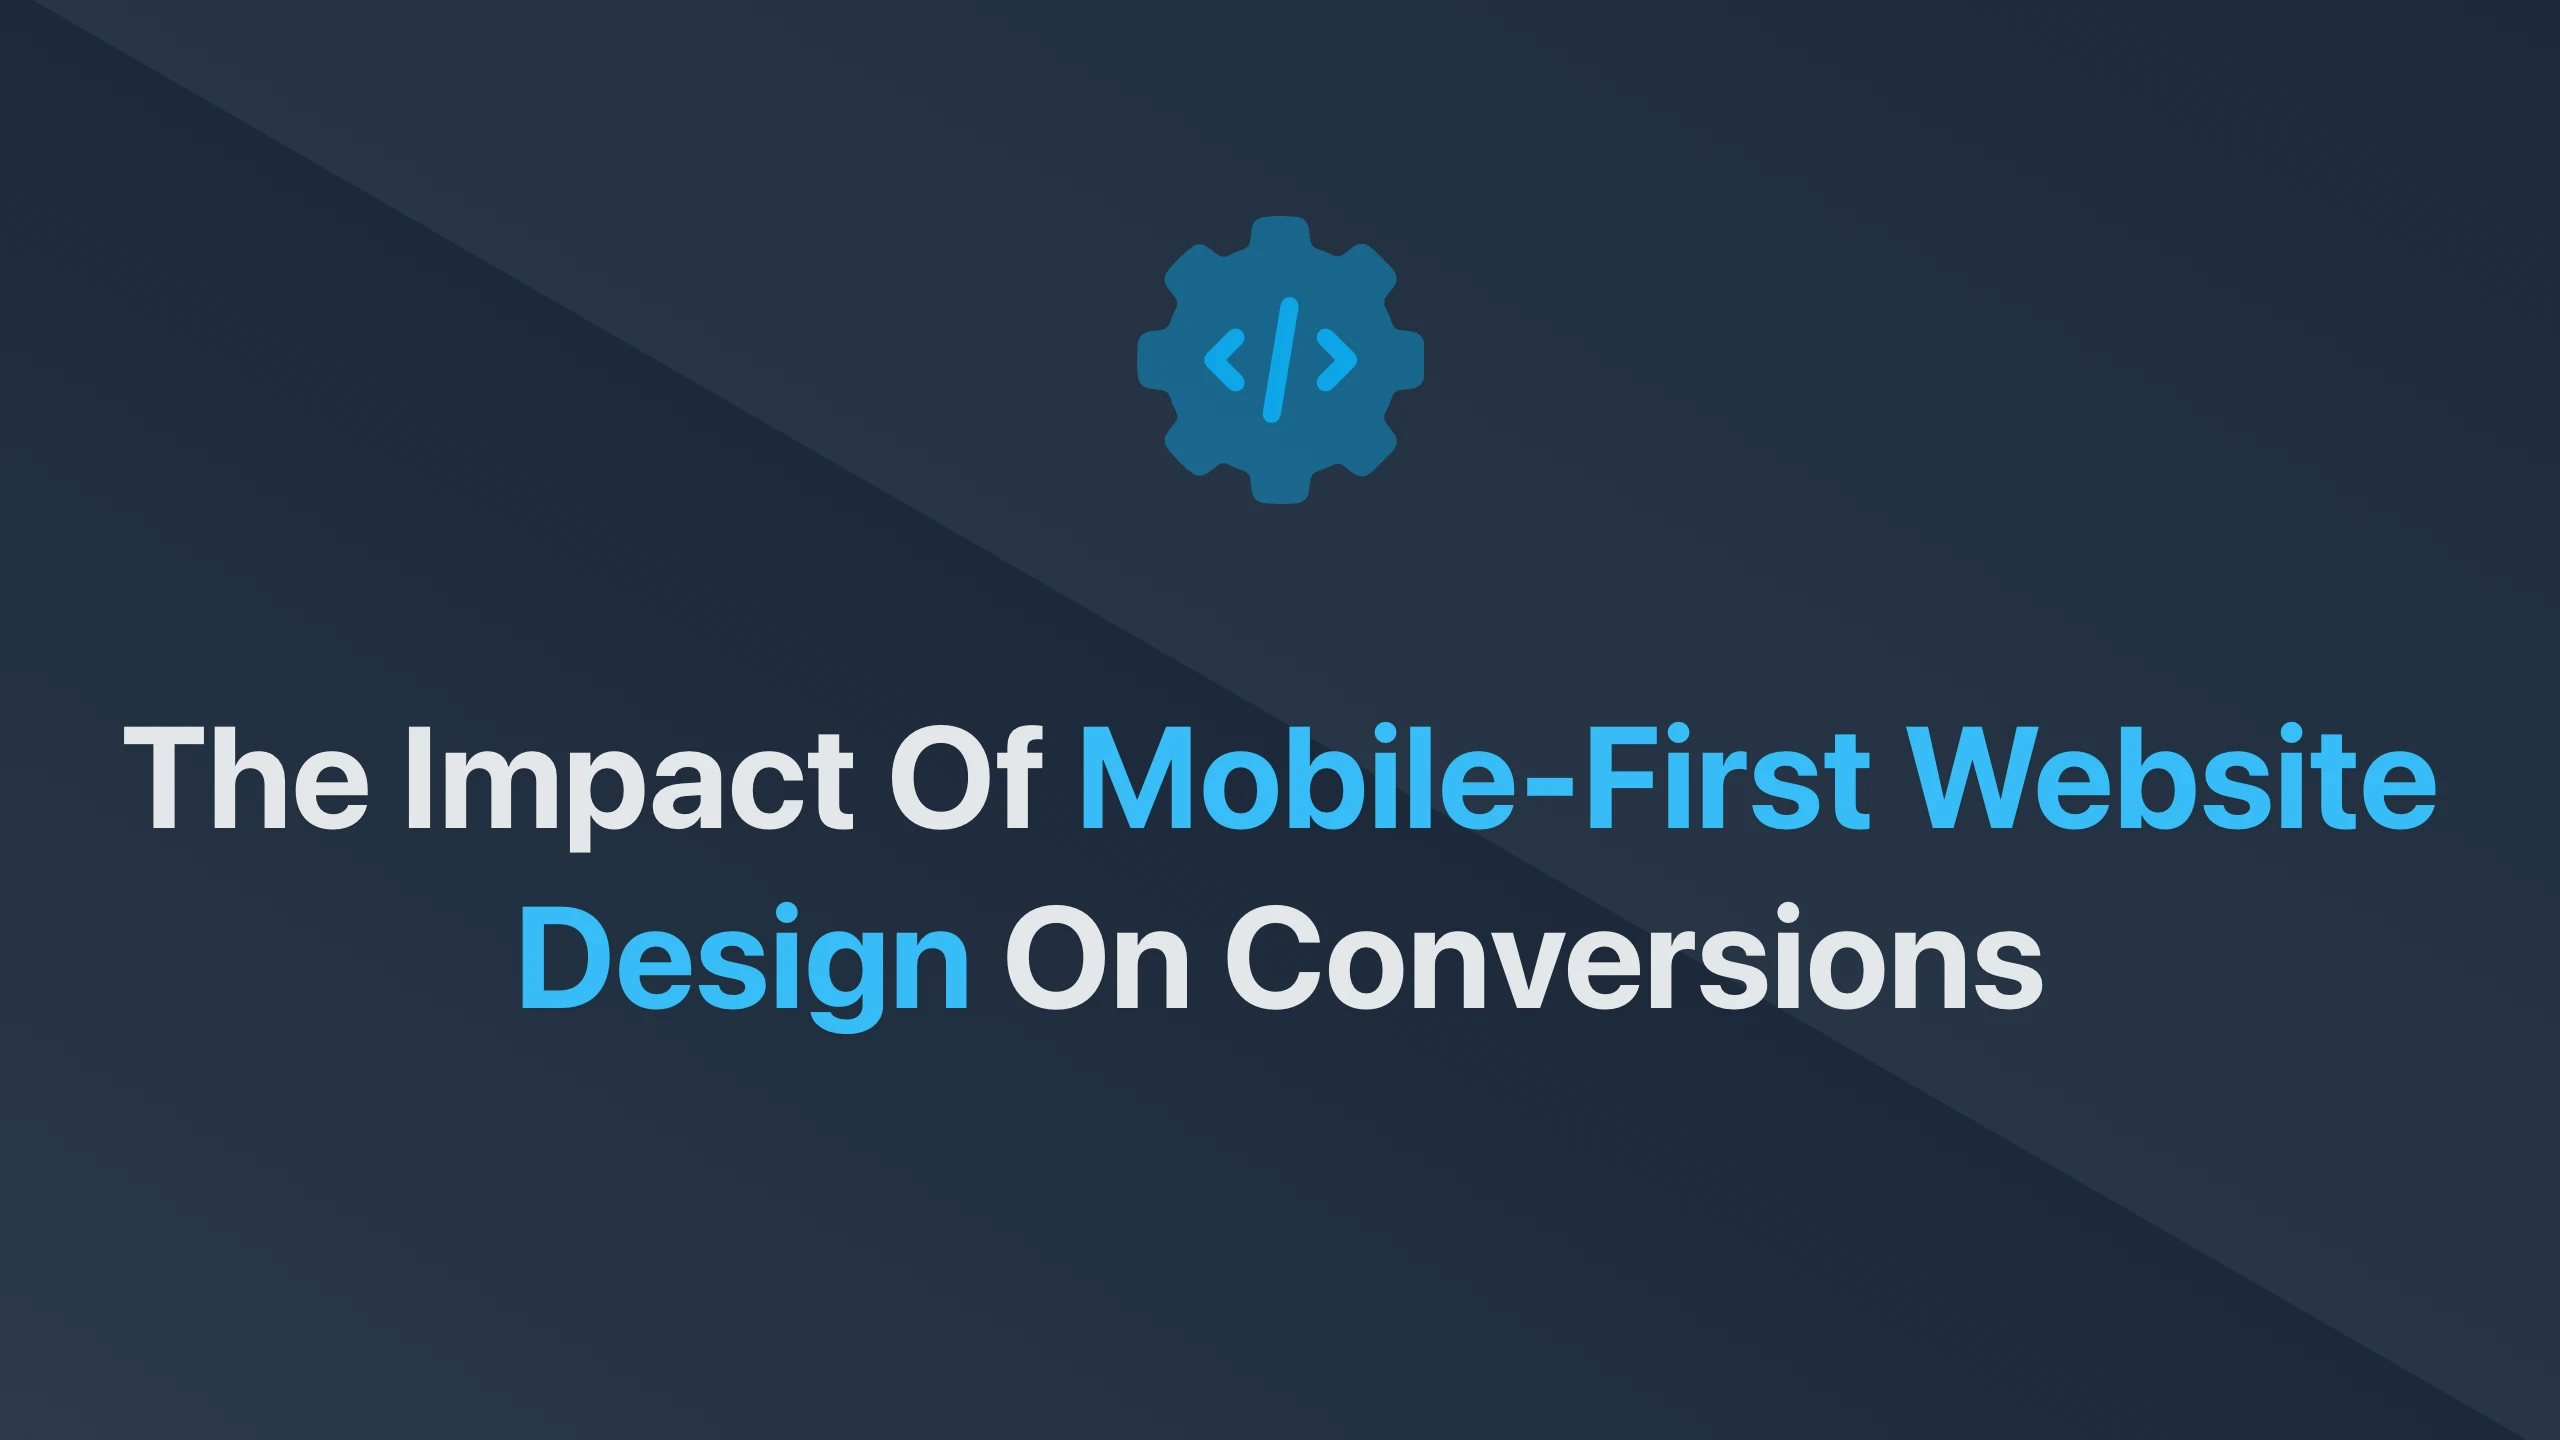 Cover Image for The Impact of Mobile-First Website Design on Conversions